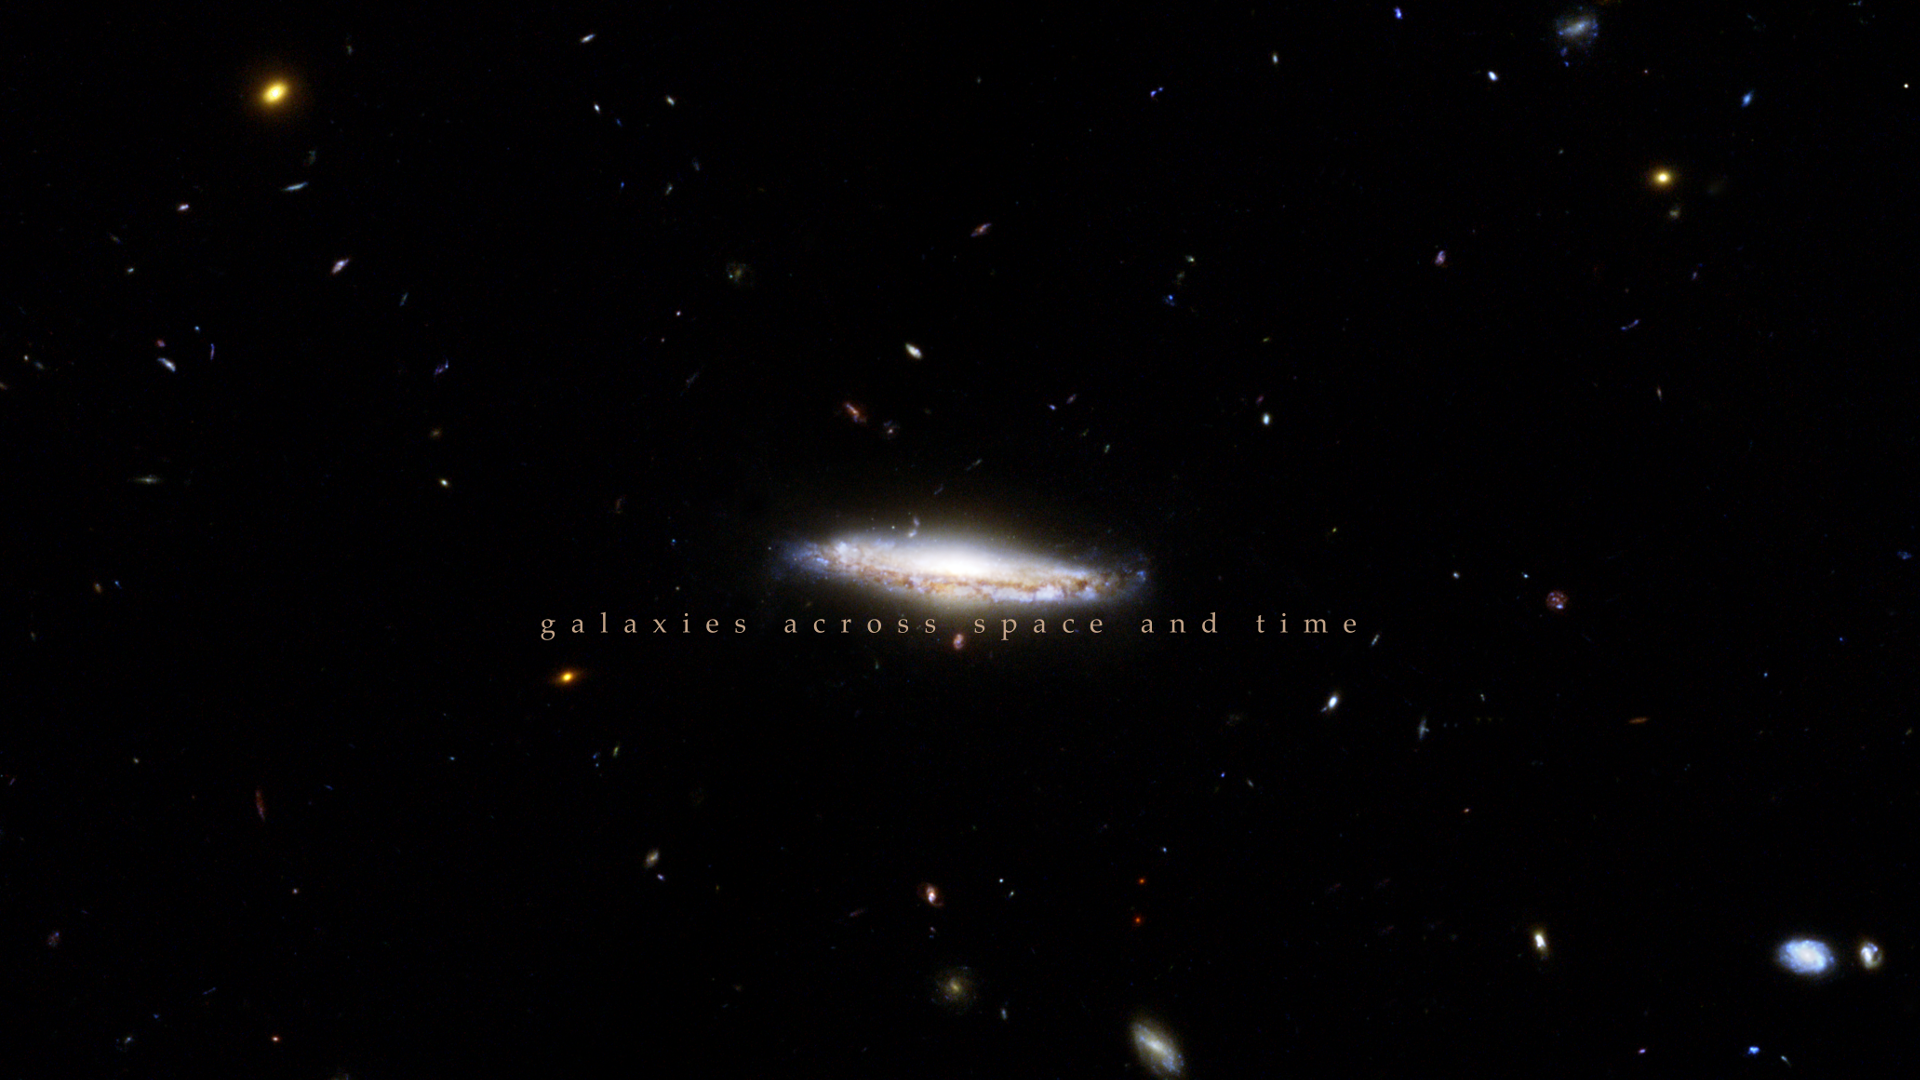 This film explores galaxies within a Hubble observation looking deep into space and across ten billion years of cosmic history.